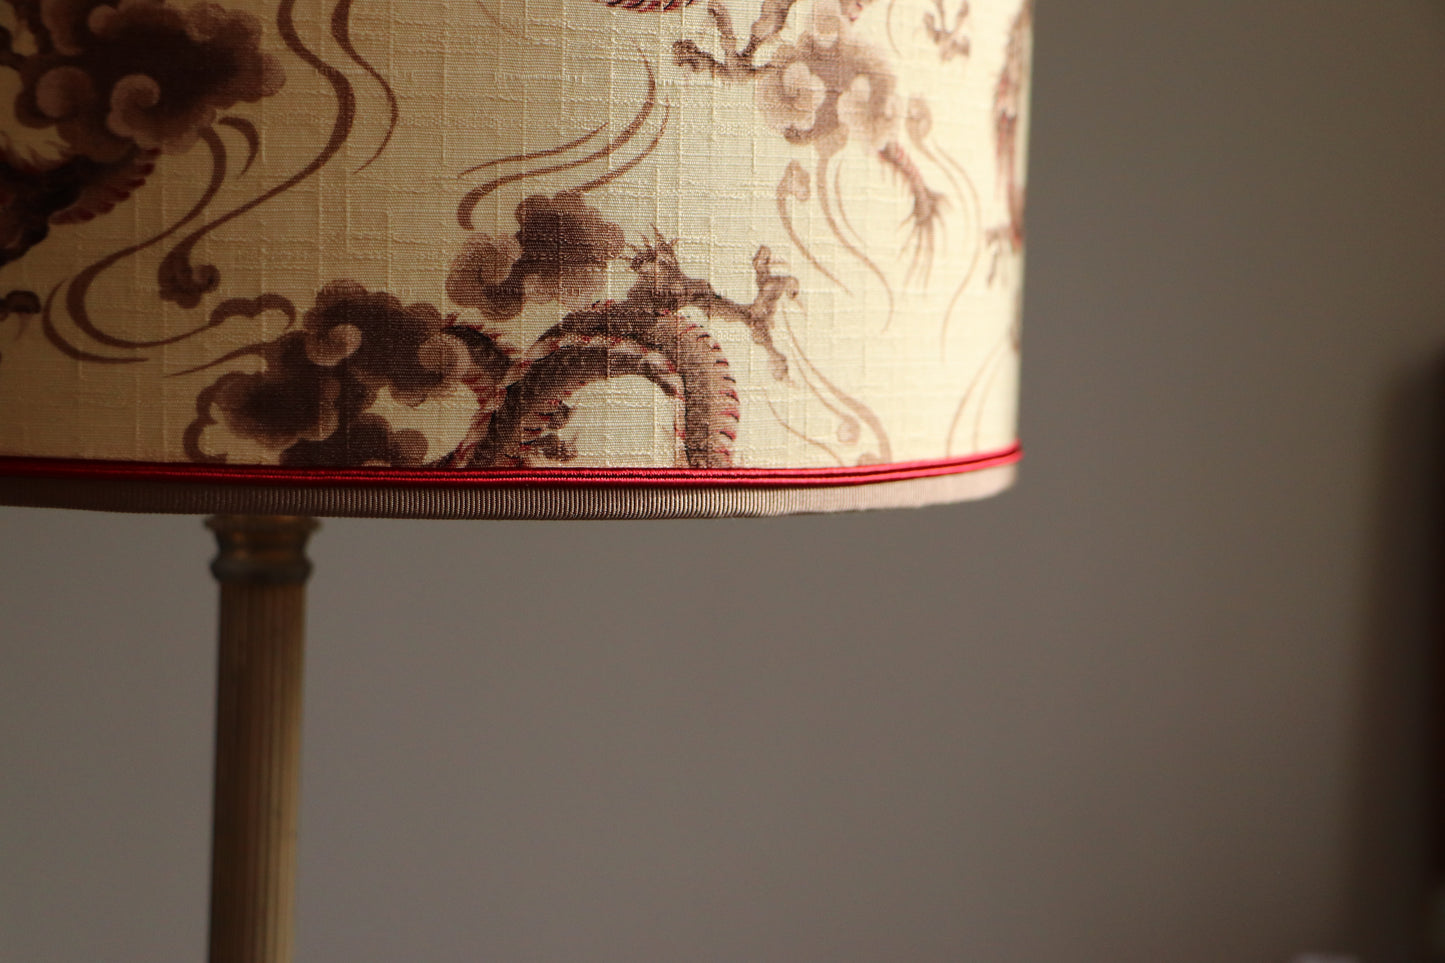 DRAGONS lampshade laminated in Japanese fabric, ref D3